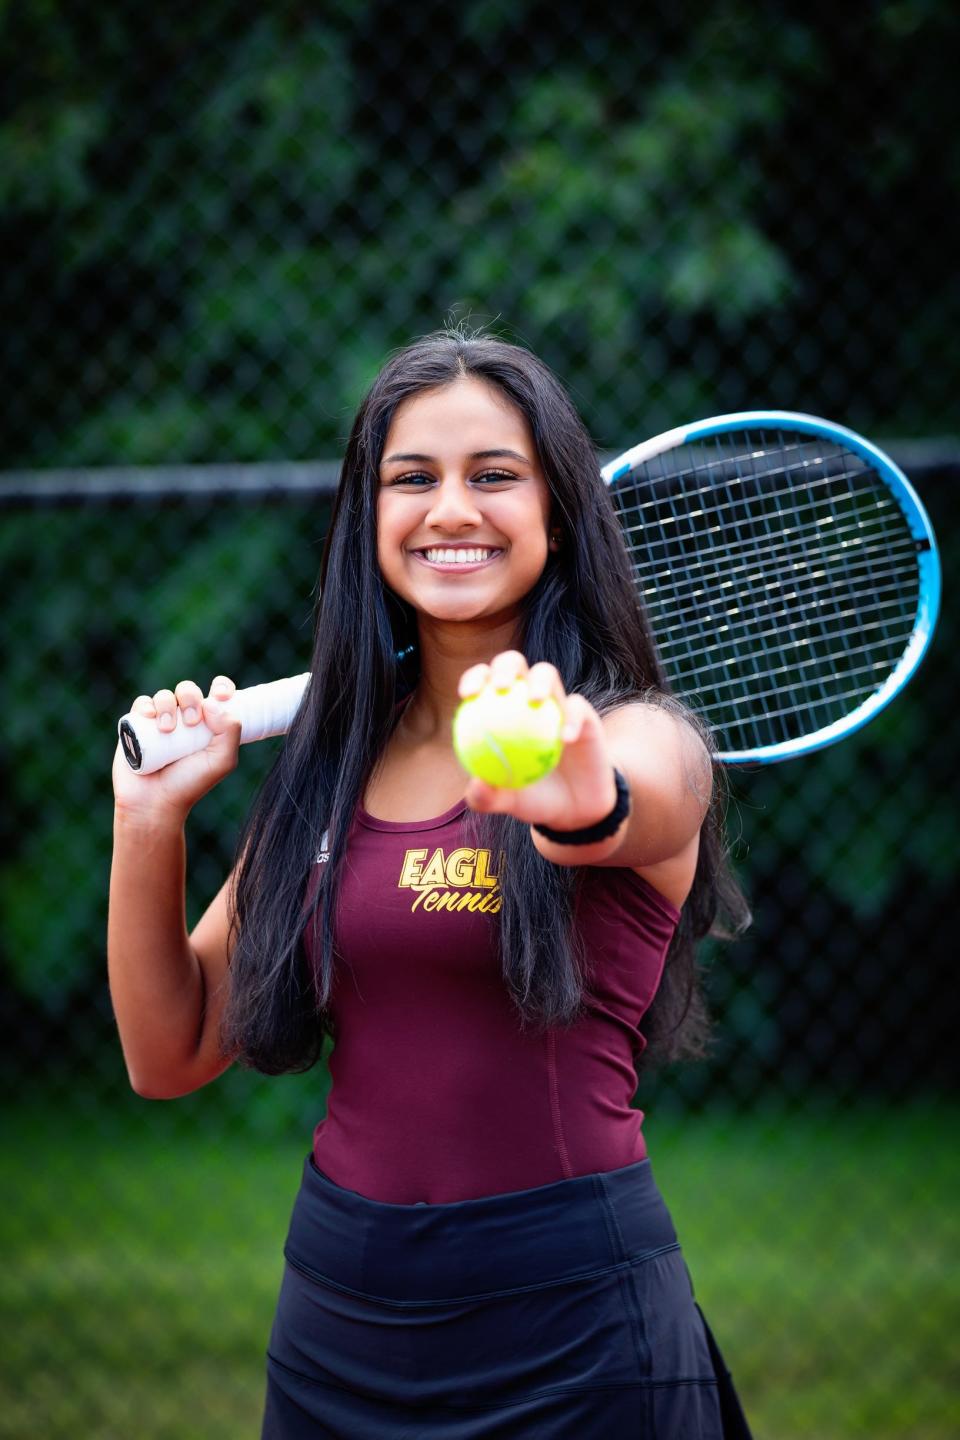 Dunlap High School senior Shikha Agarwal started tennis at a later age, but she's made up for lost time as an elite varsity player headed back to the 2023 IHSA State Finals tournament this week.